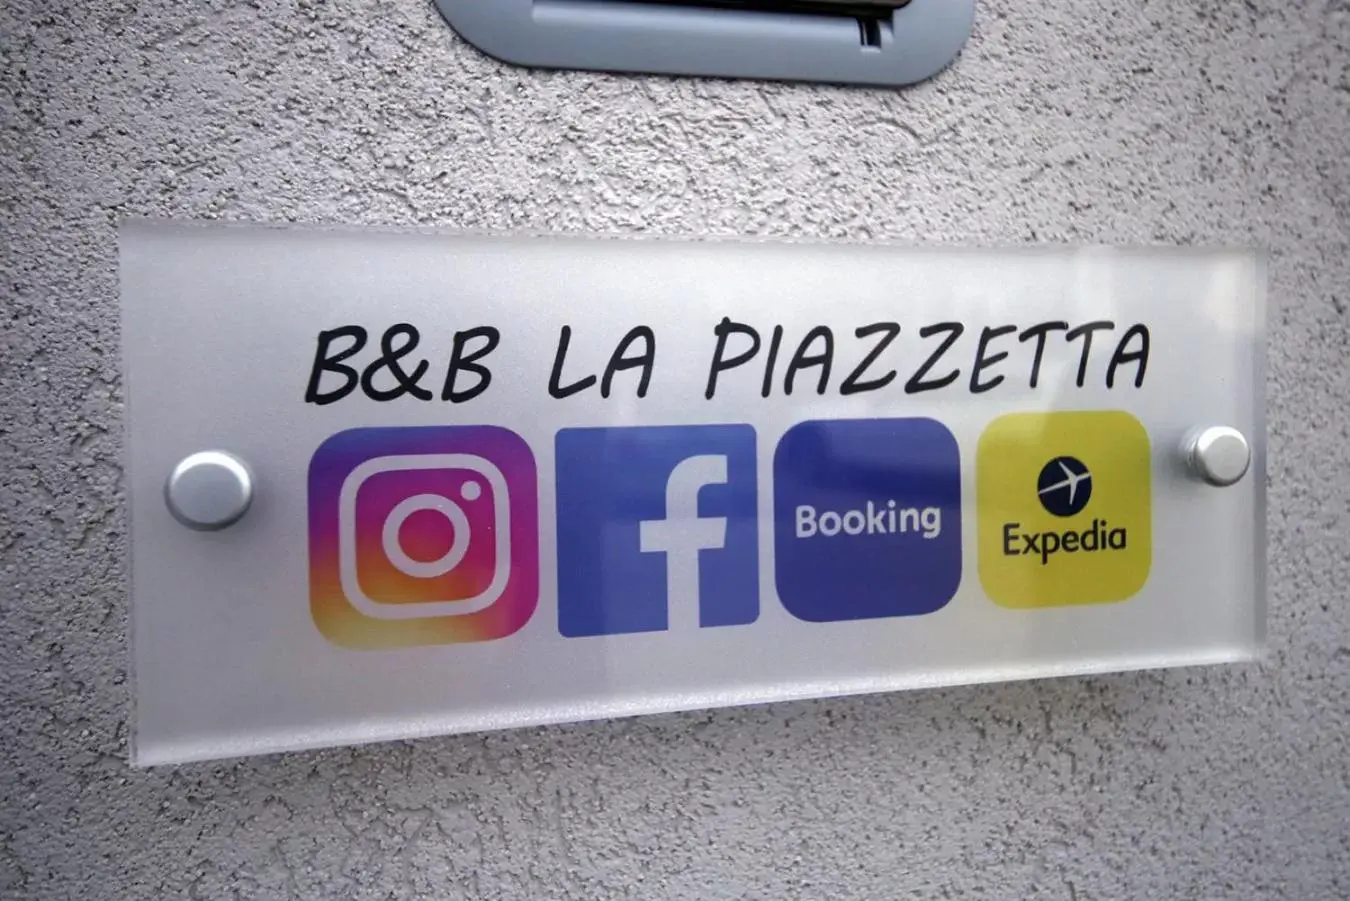 Property logo or sign, Property Logo/Sign in La piazzetta